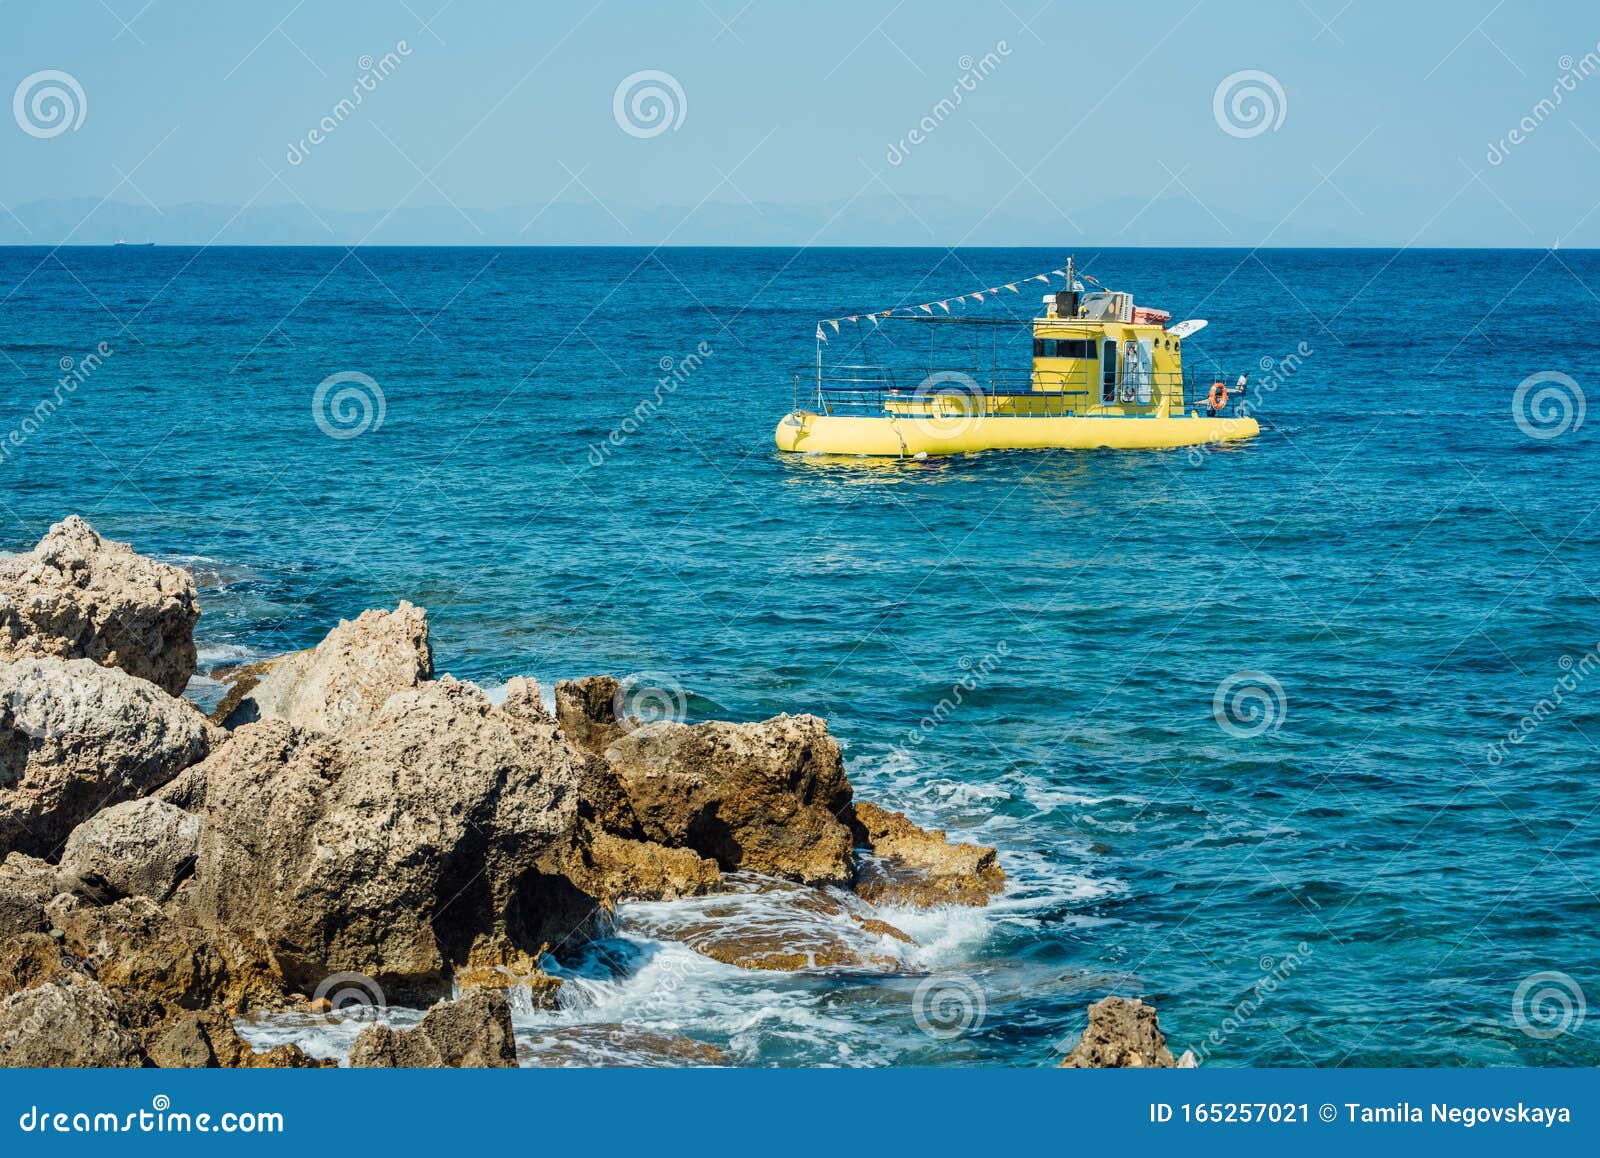 https://thumbs.dreamstime.com/z/funny-yellow-diving-boat-lots-flags-different-countries-blue-sea-over-rocky-shore-rhodes-island-greece-hot-summer-165257021.jpg